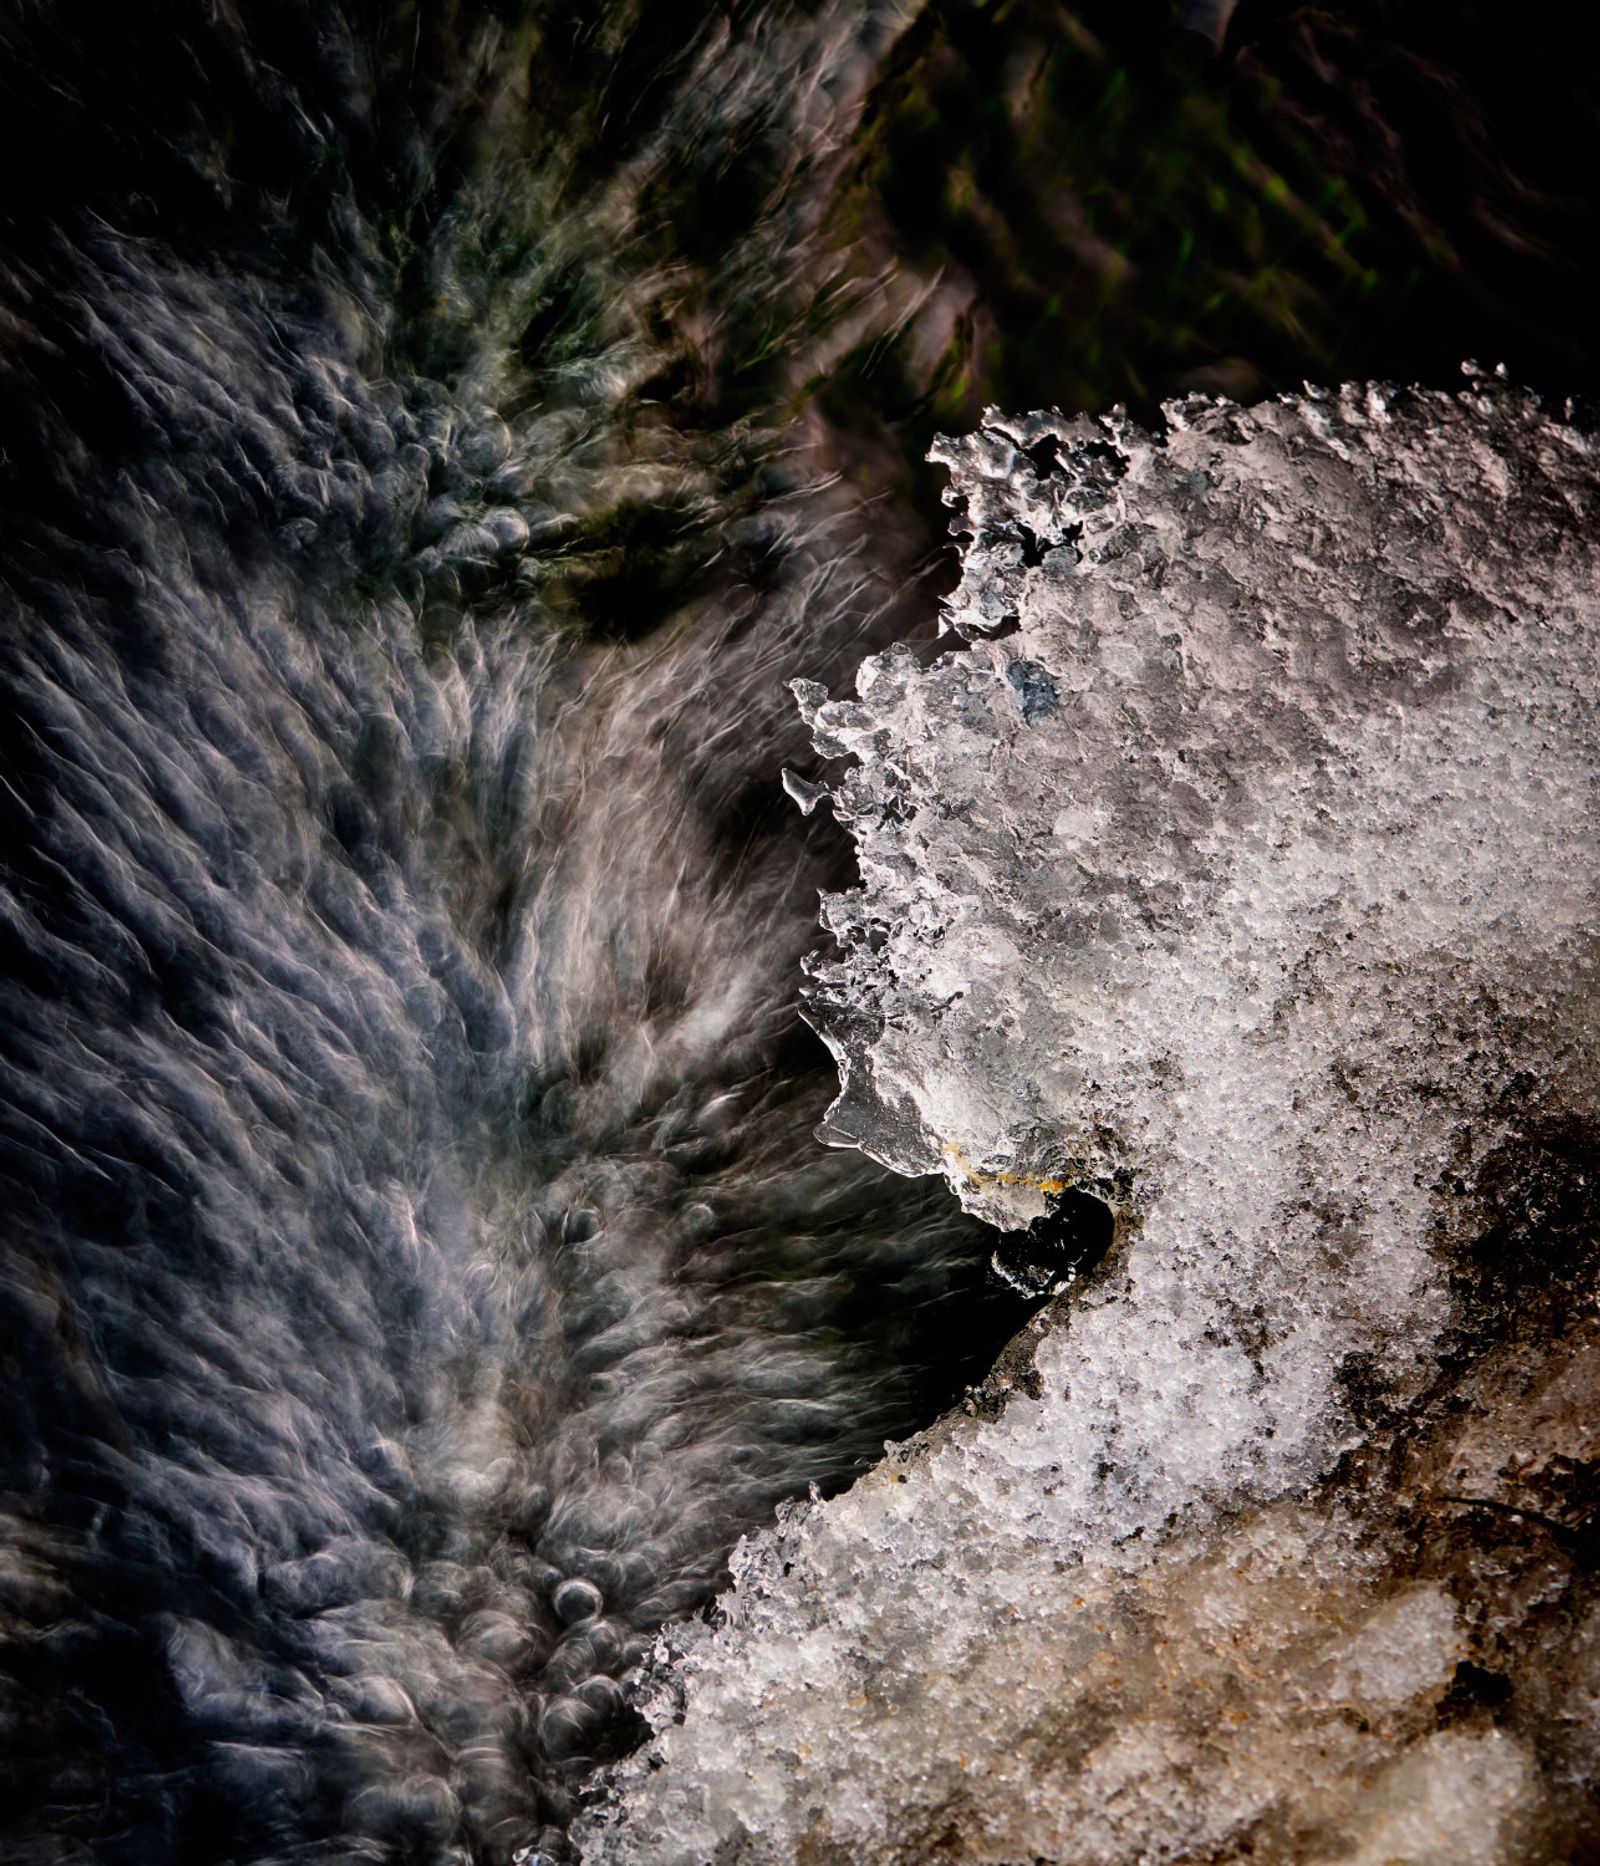 © joi@gugguson.com Gudbjargarson - Image from the Glacialis photography project